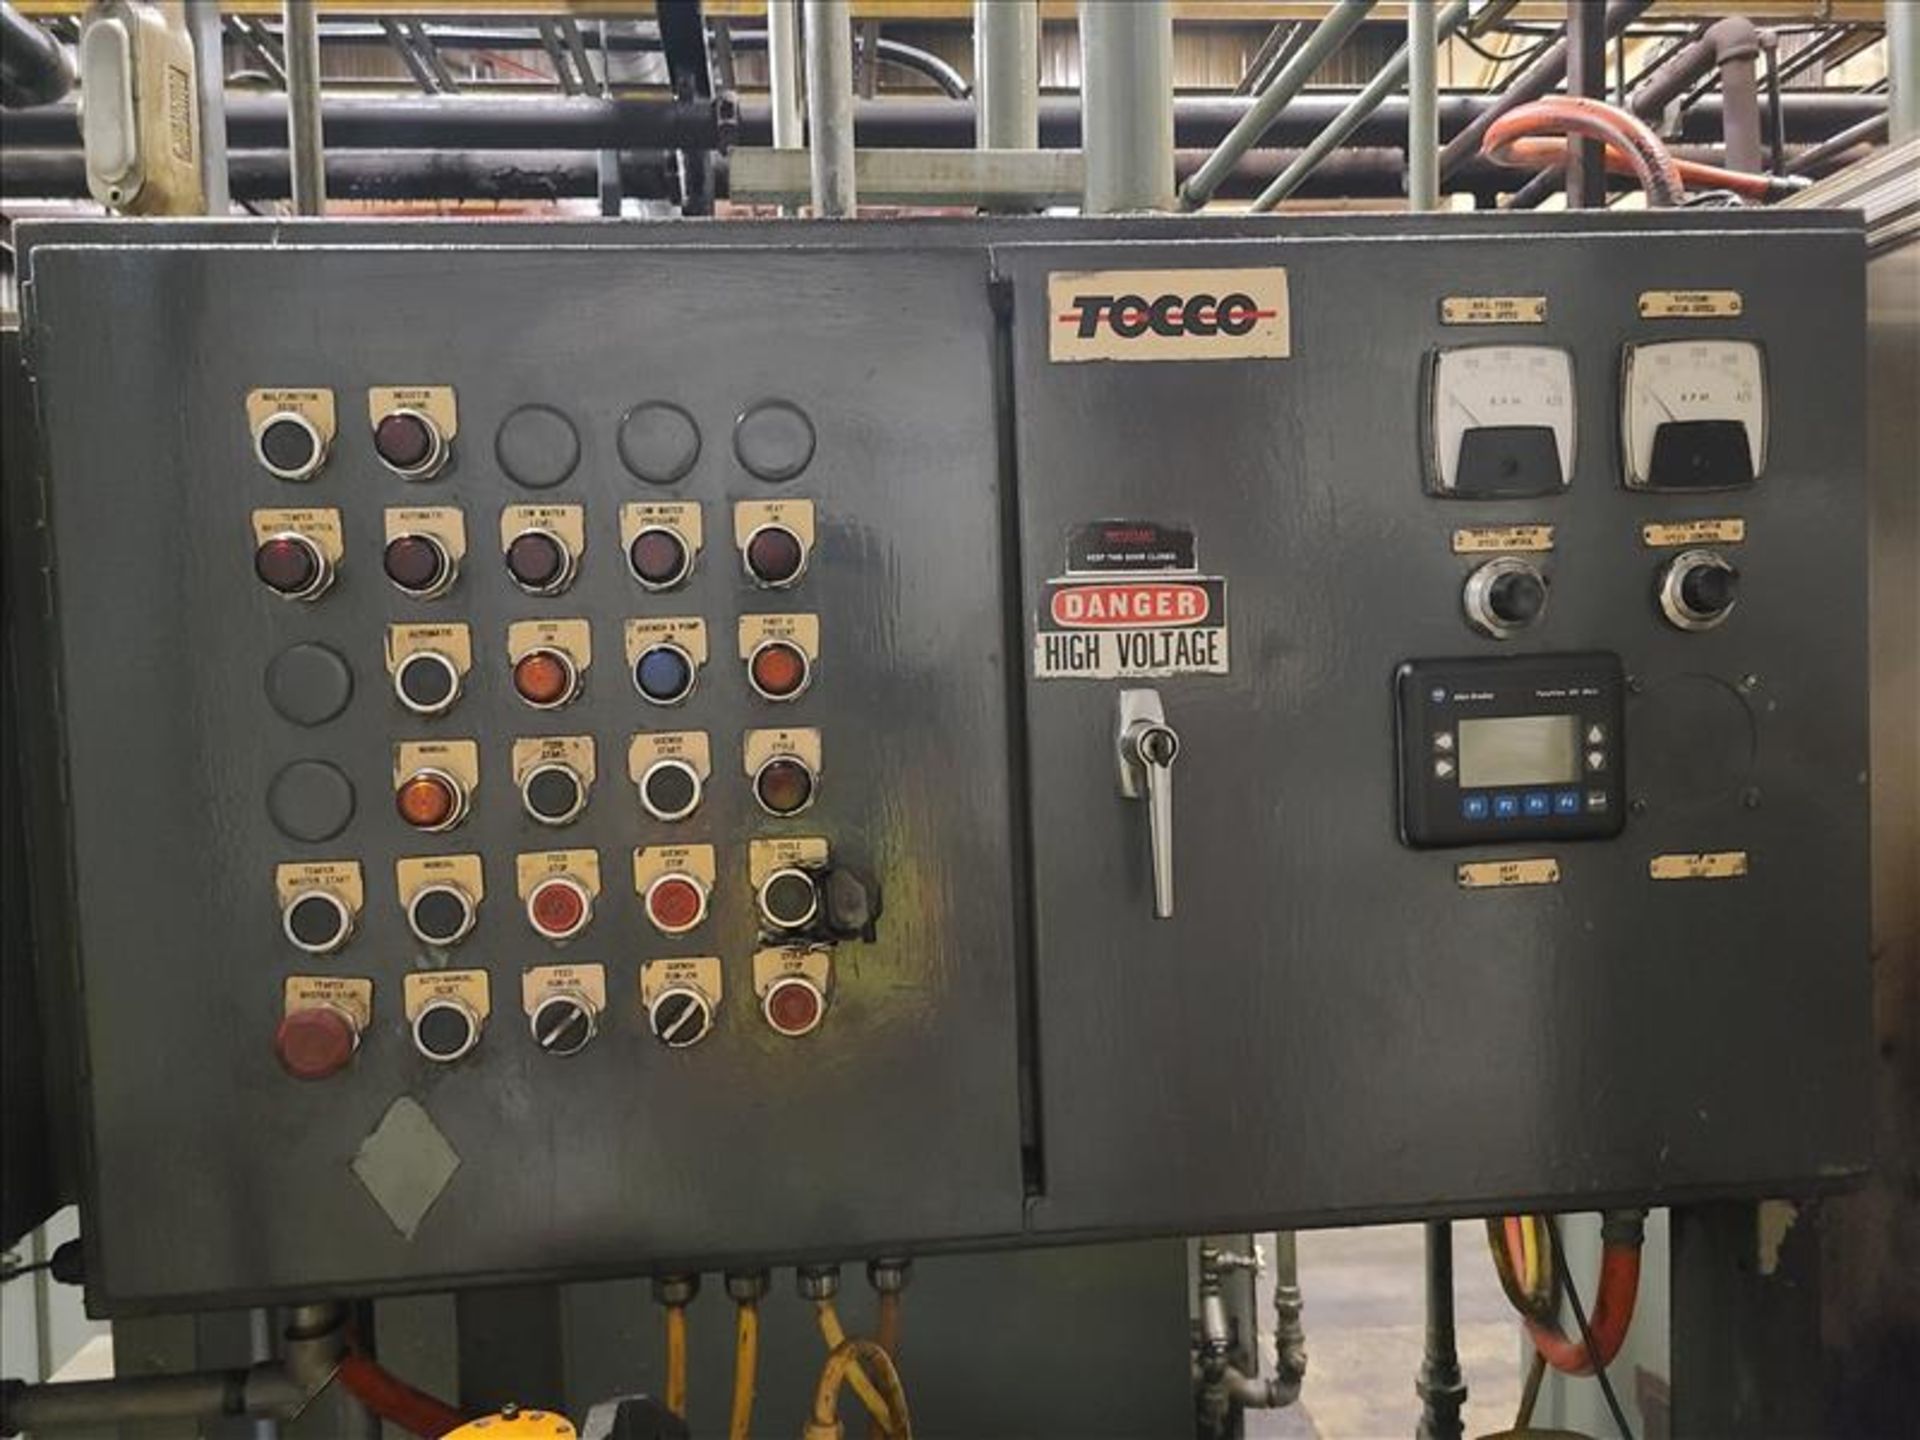 TOCCO Tempering Unit w/ INDUCTRON 100-3T-02 100 kw, s/n 12-8313-11 c/w Distilled Water Cooling/ - Image 5 of 20